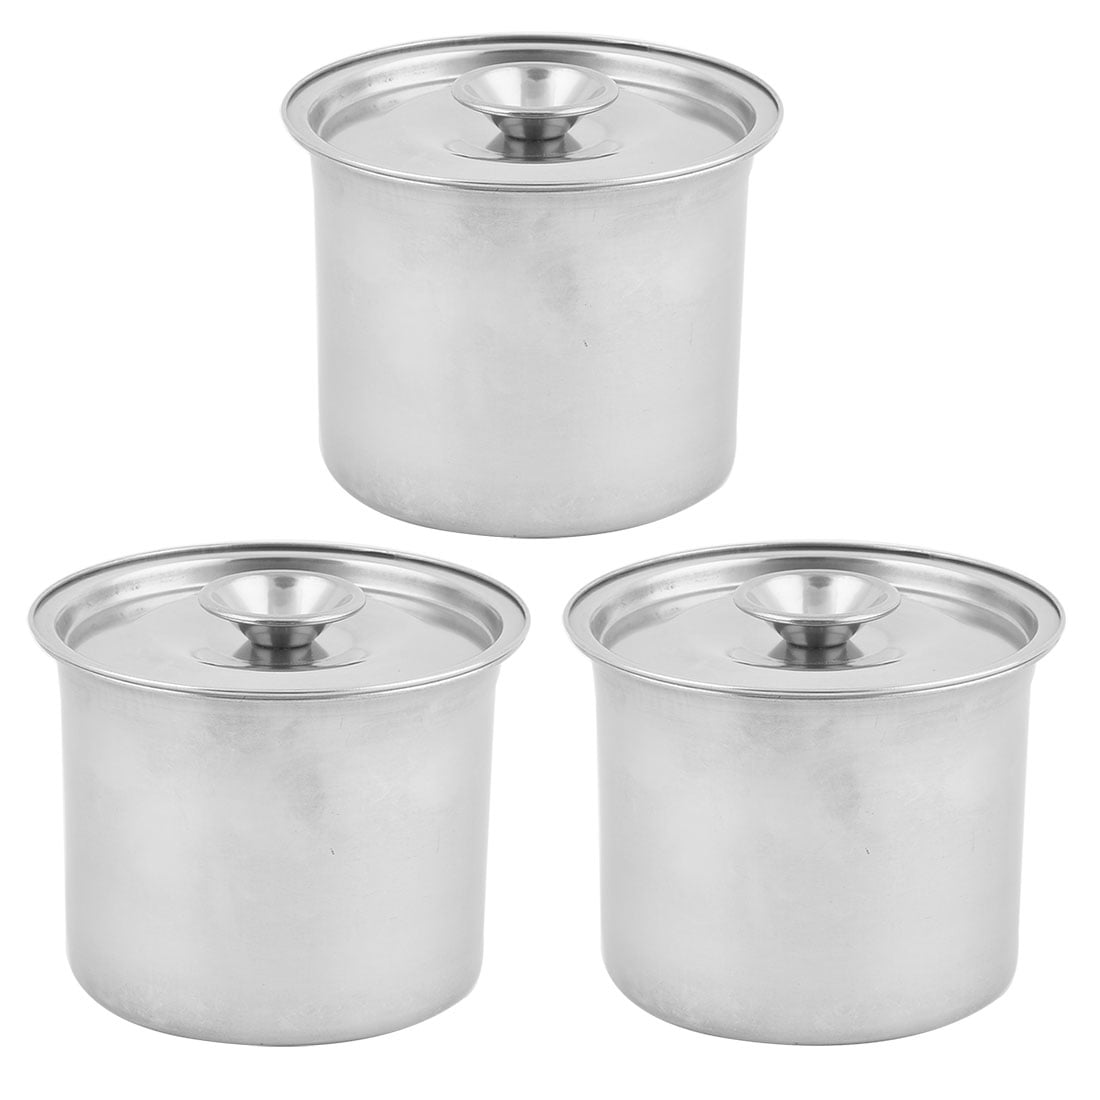 50 Pcs Metal Sauce Cups 2.5oz Ramekins, Stainless Steel Dipping Sauce Cups Metal Condiment Container Reusable Round Butter Dressing Sauce Cups